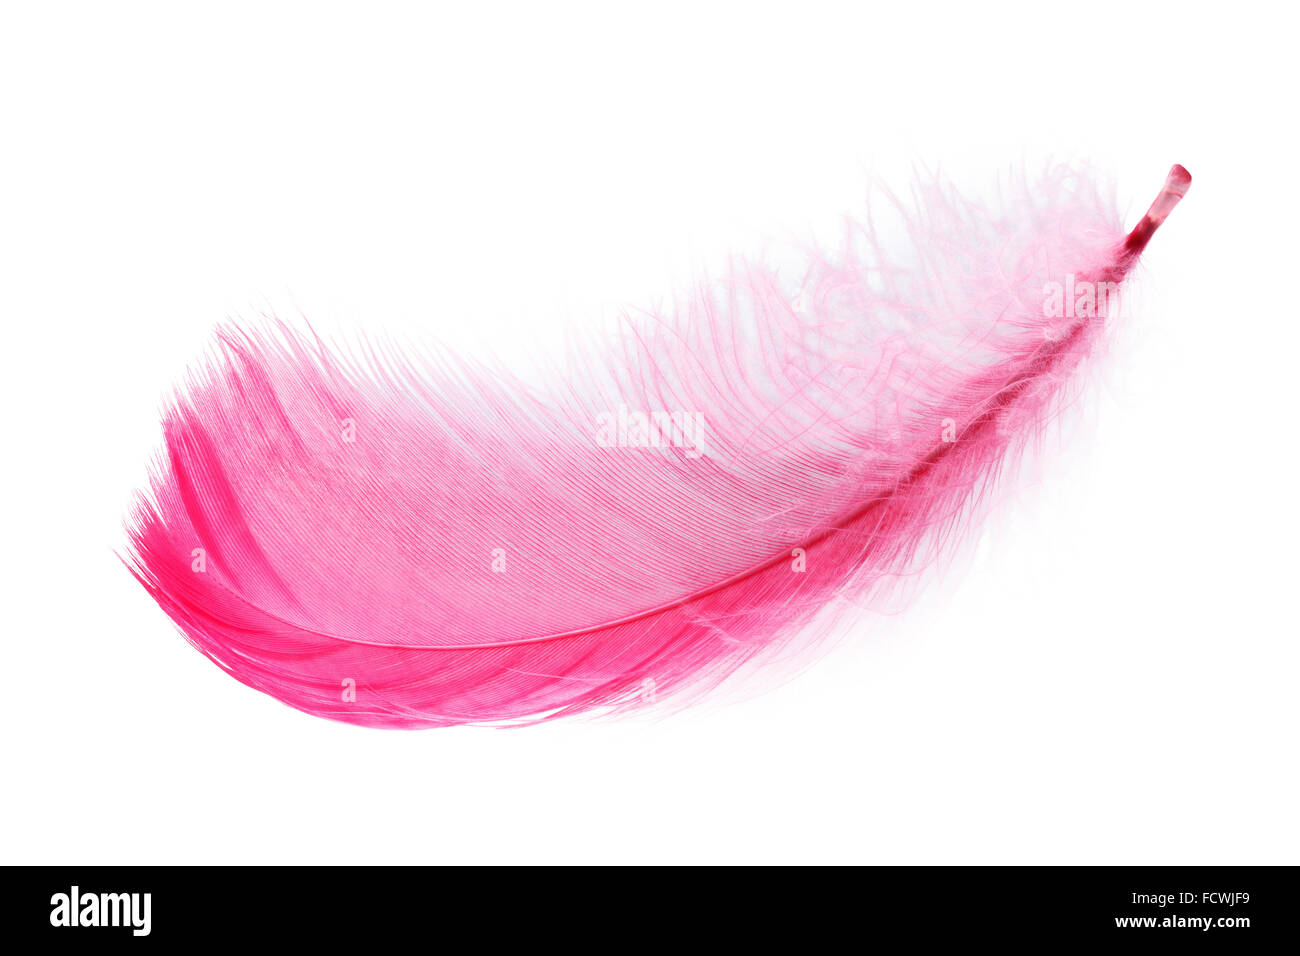 Pink feather over white background Stock Photo